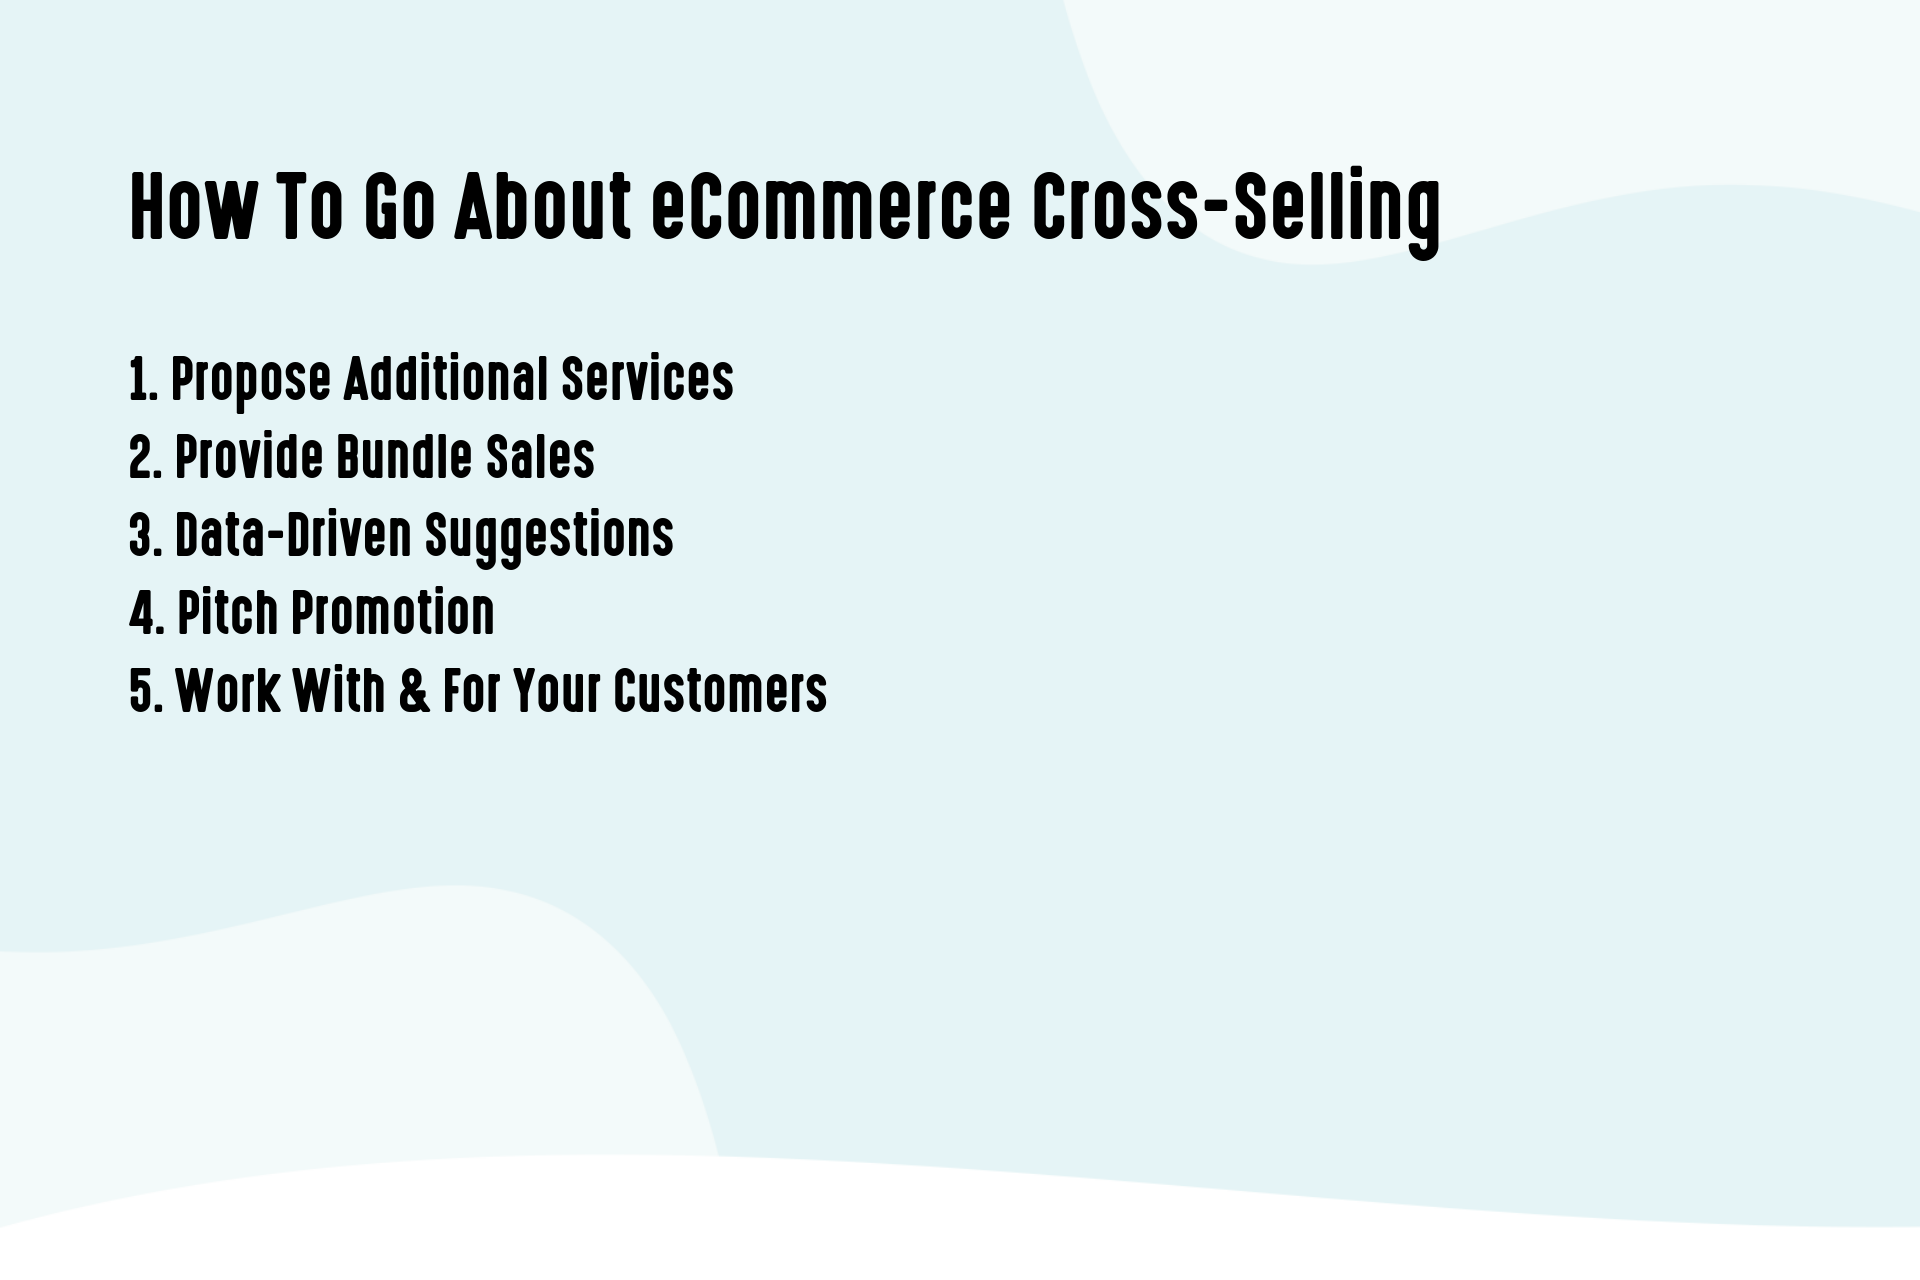 How To Go About eCommerce Cross-Selling